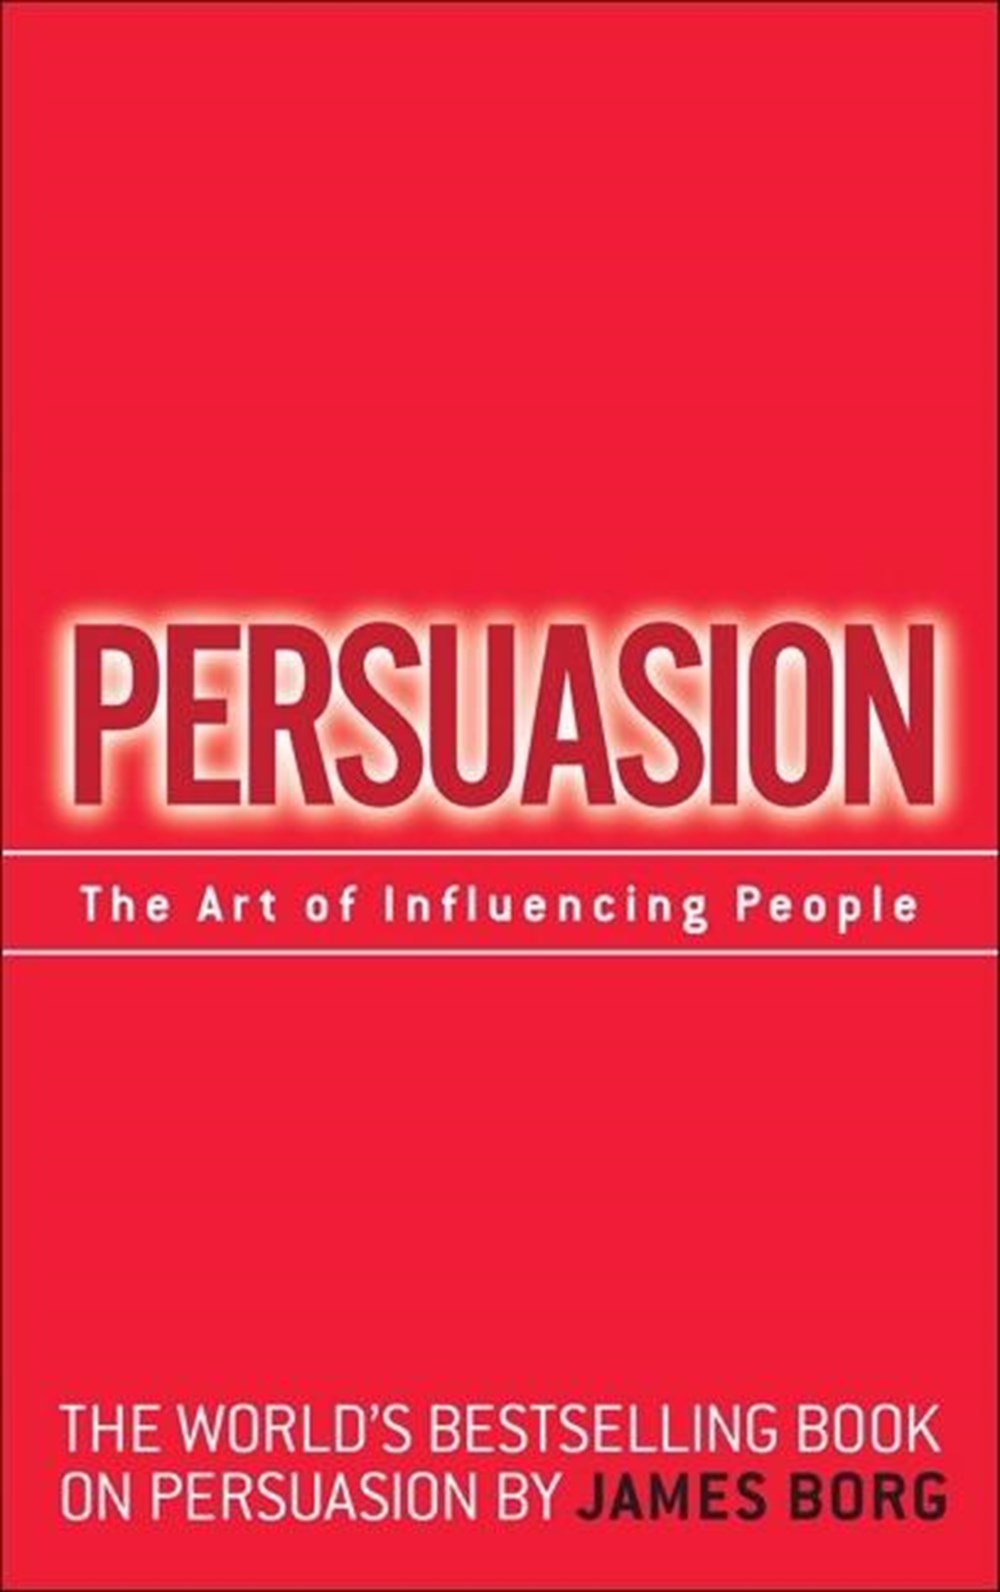 Persuasion The Art of Influencing People